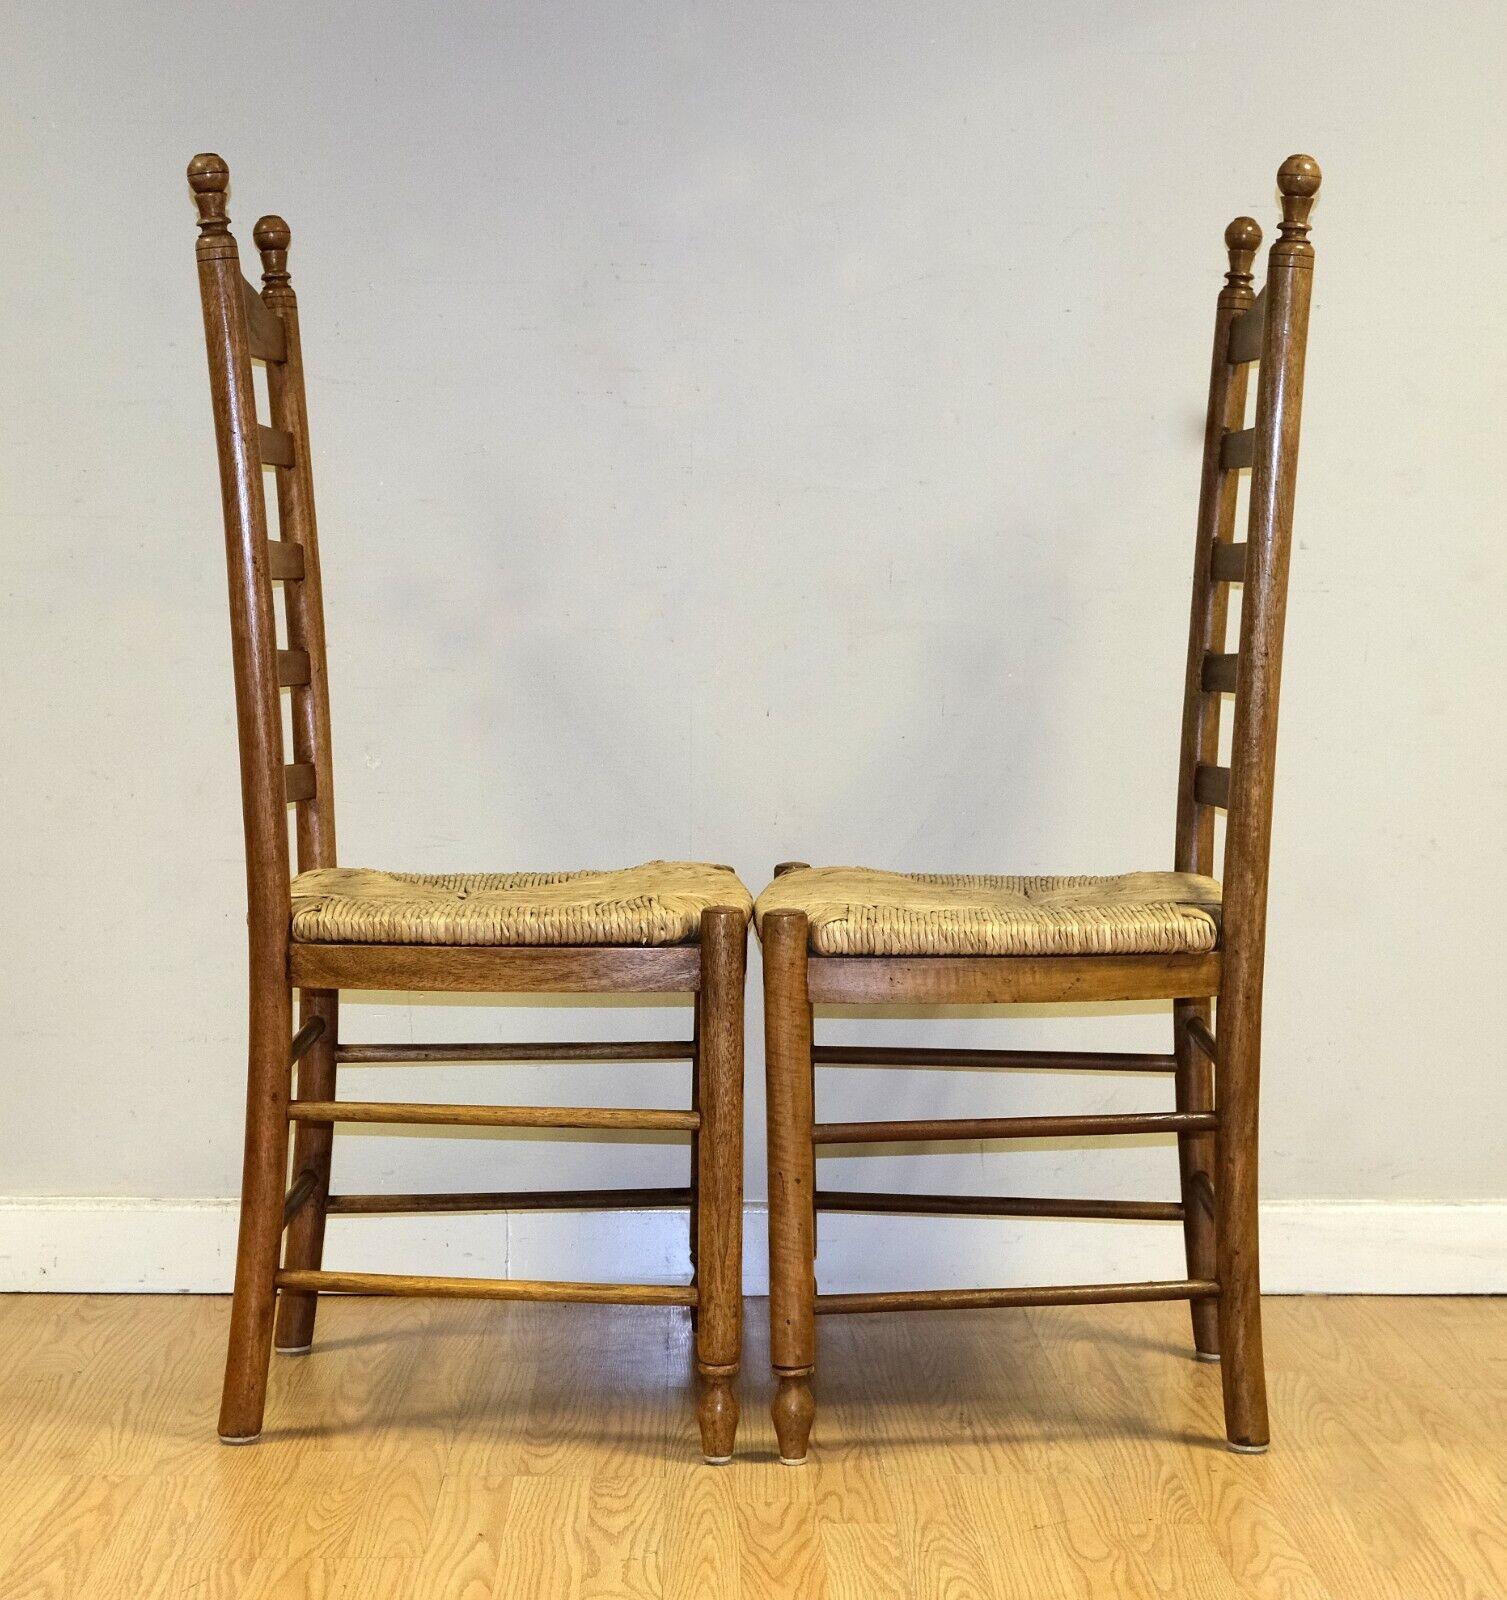 LOVELY SET OF 4 OAK FARMHOUSE RUSH SEAT LADDER BACK DiNING CHAIRS 1